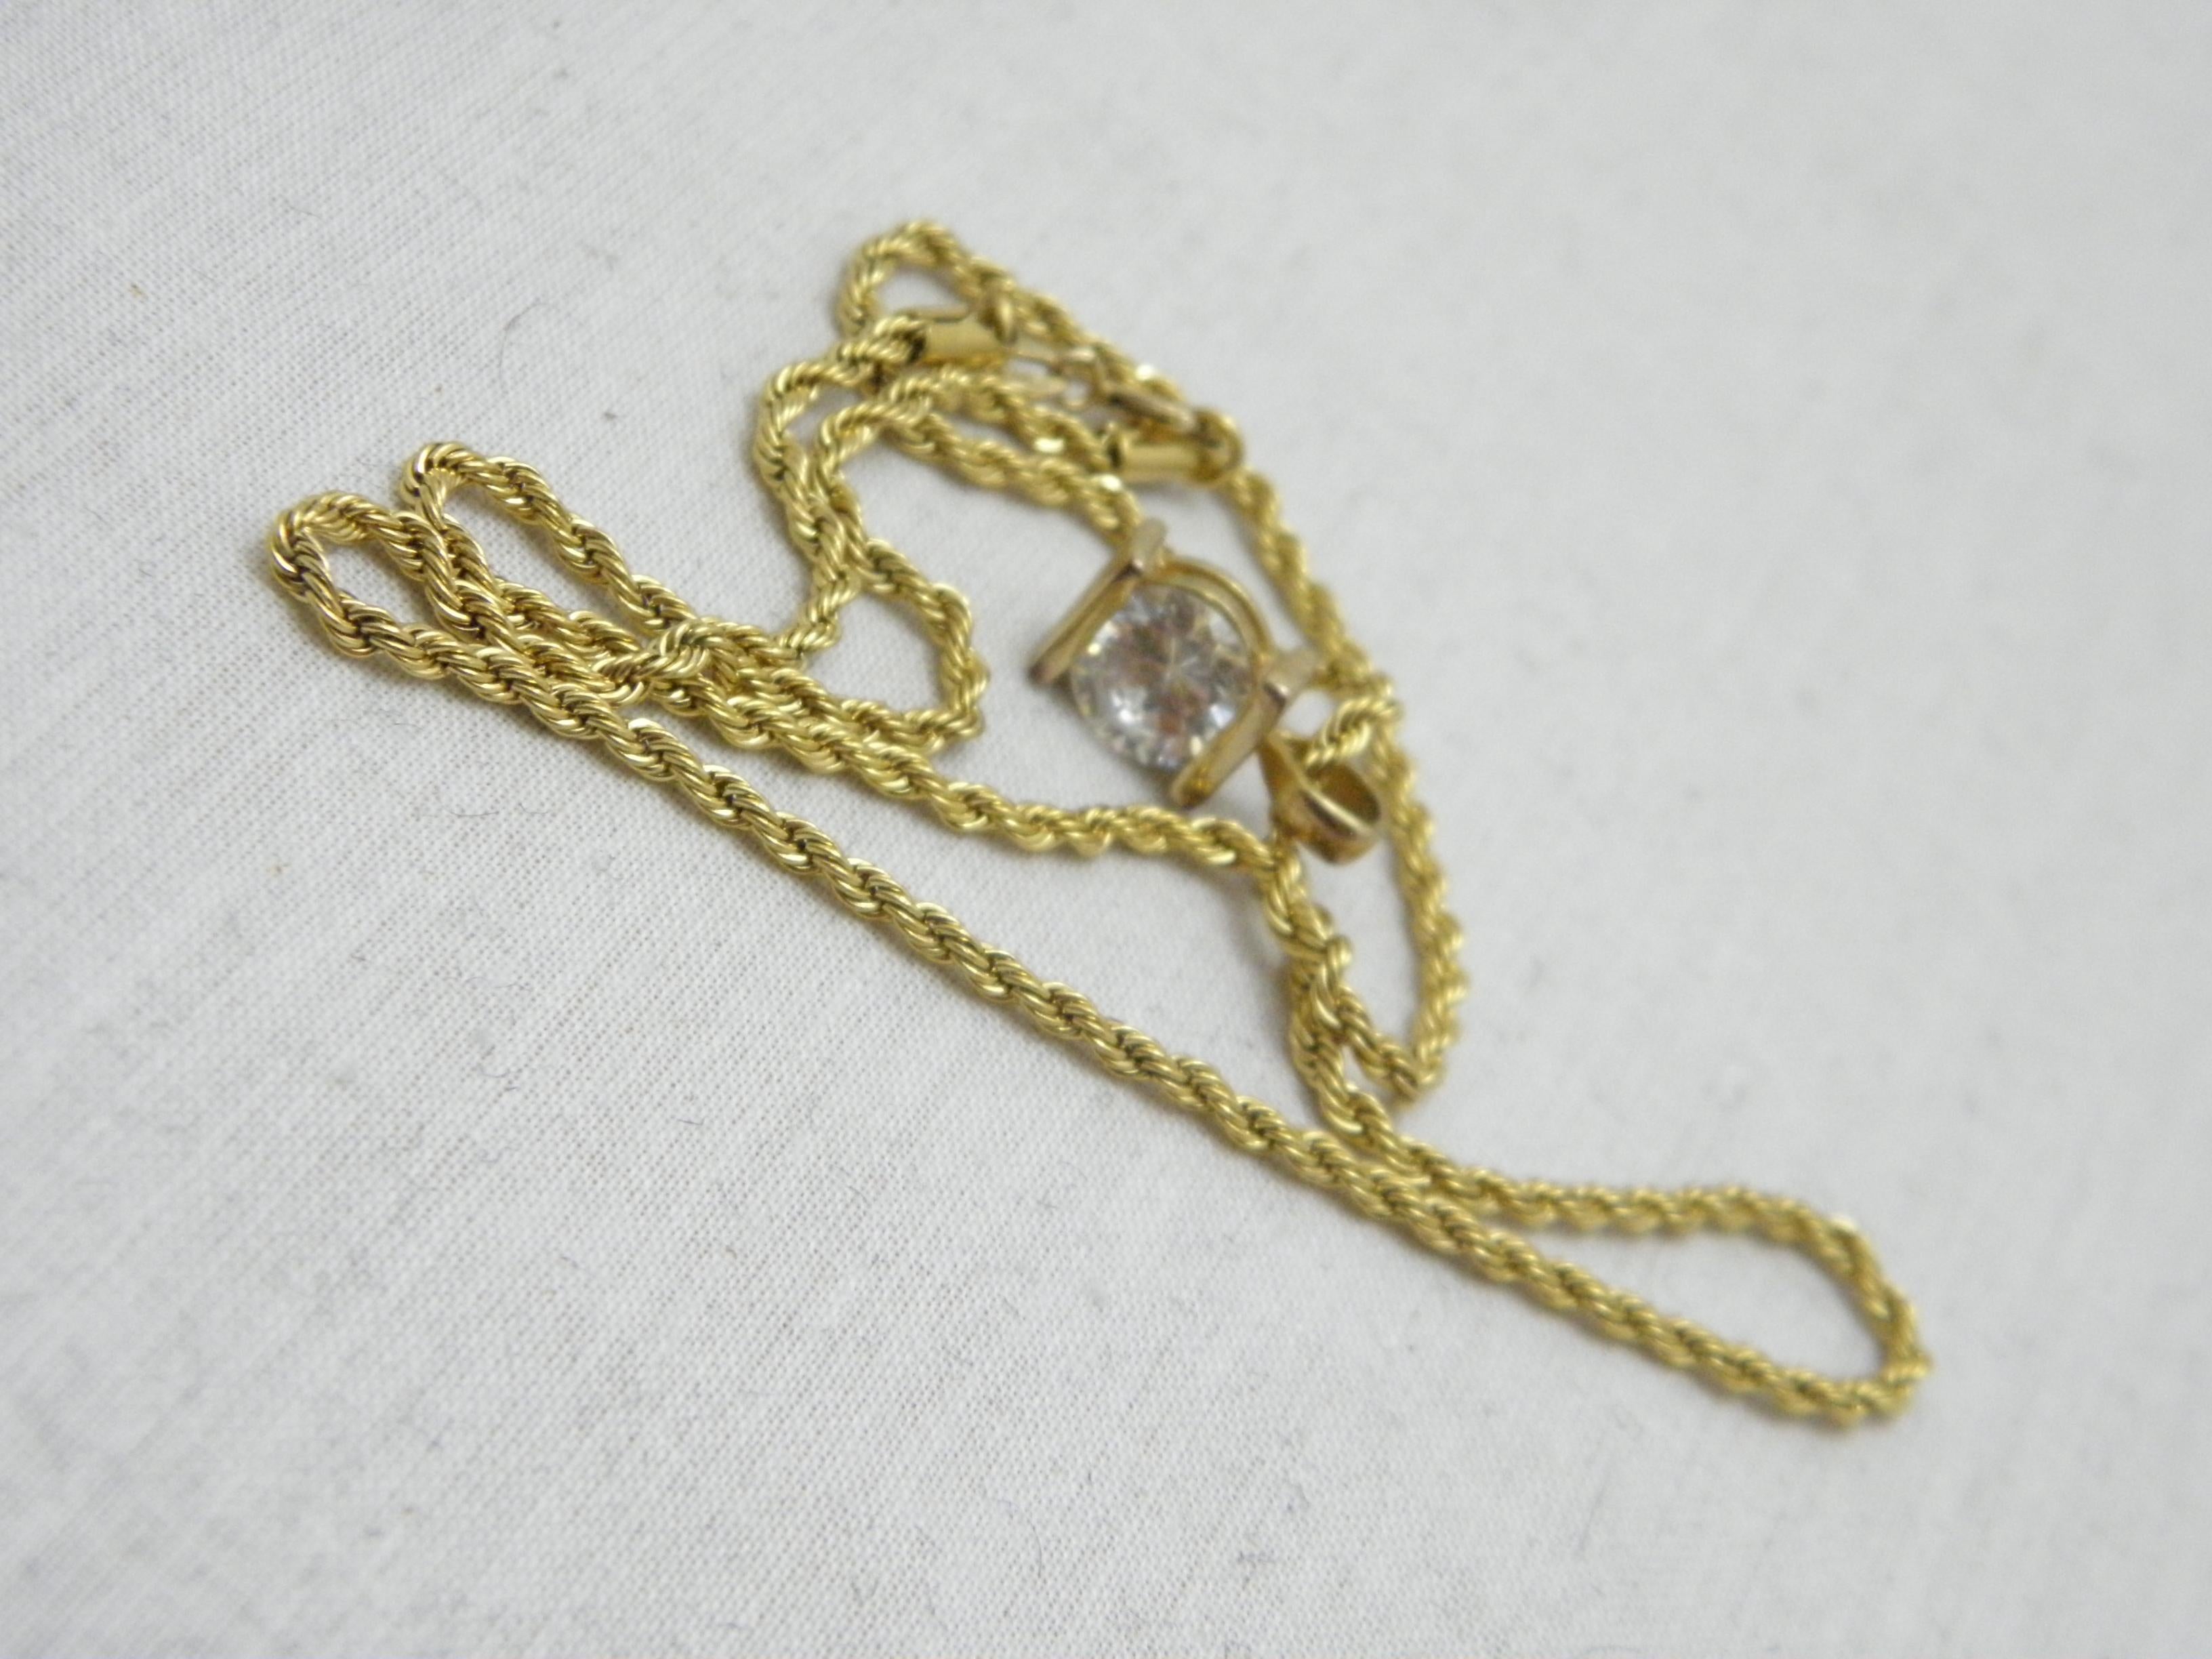 Vintage 14ct Gold Heavy Diamond Paste Pendant Necklace Rope Chain 585 18 Inch For Sale 5